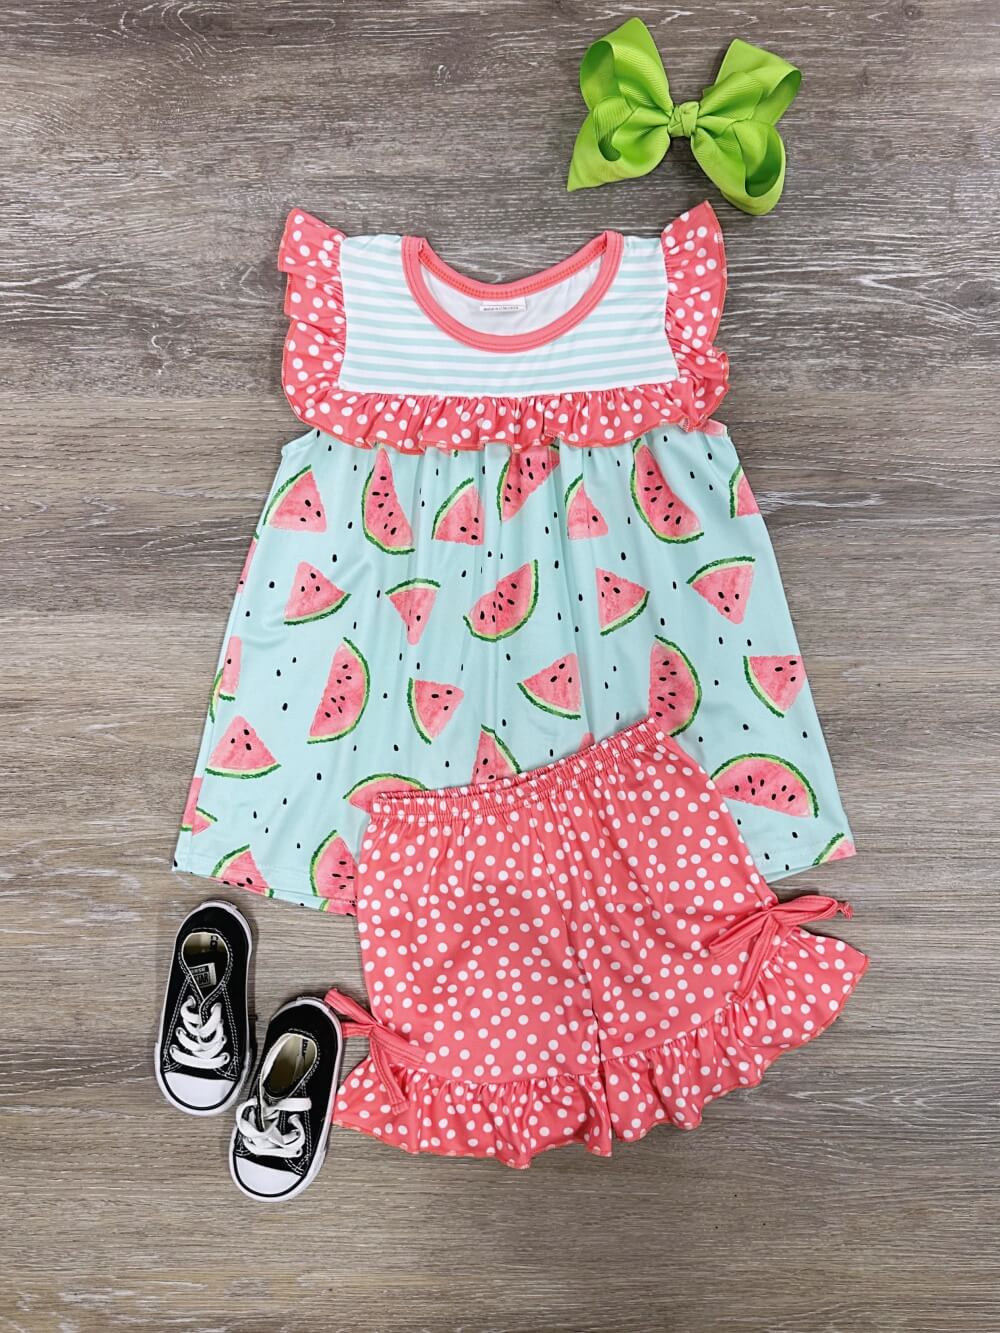 Slice of Summer Girls Watermelon Shorts Outfit - Sydney So Sweet